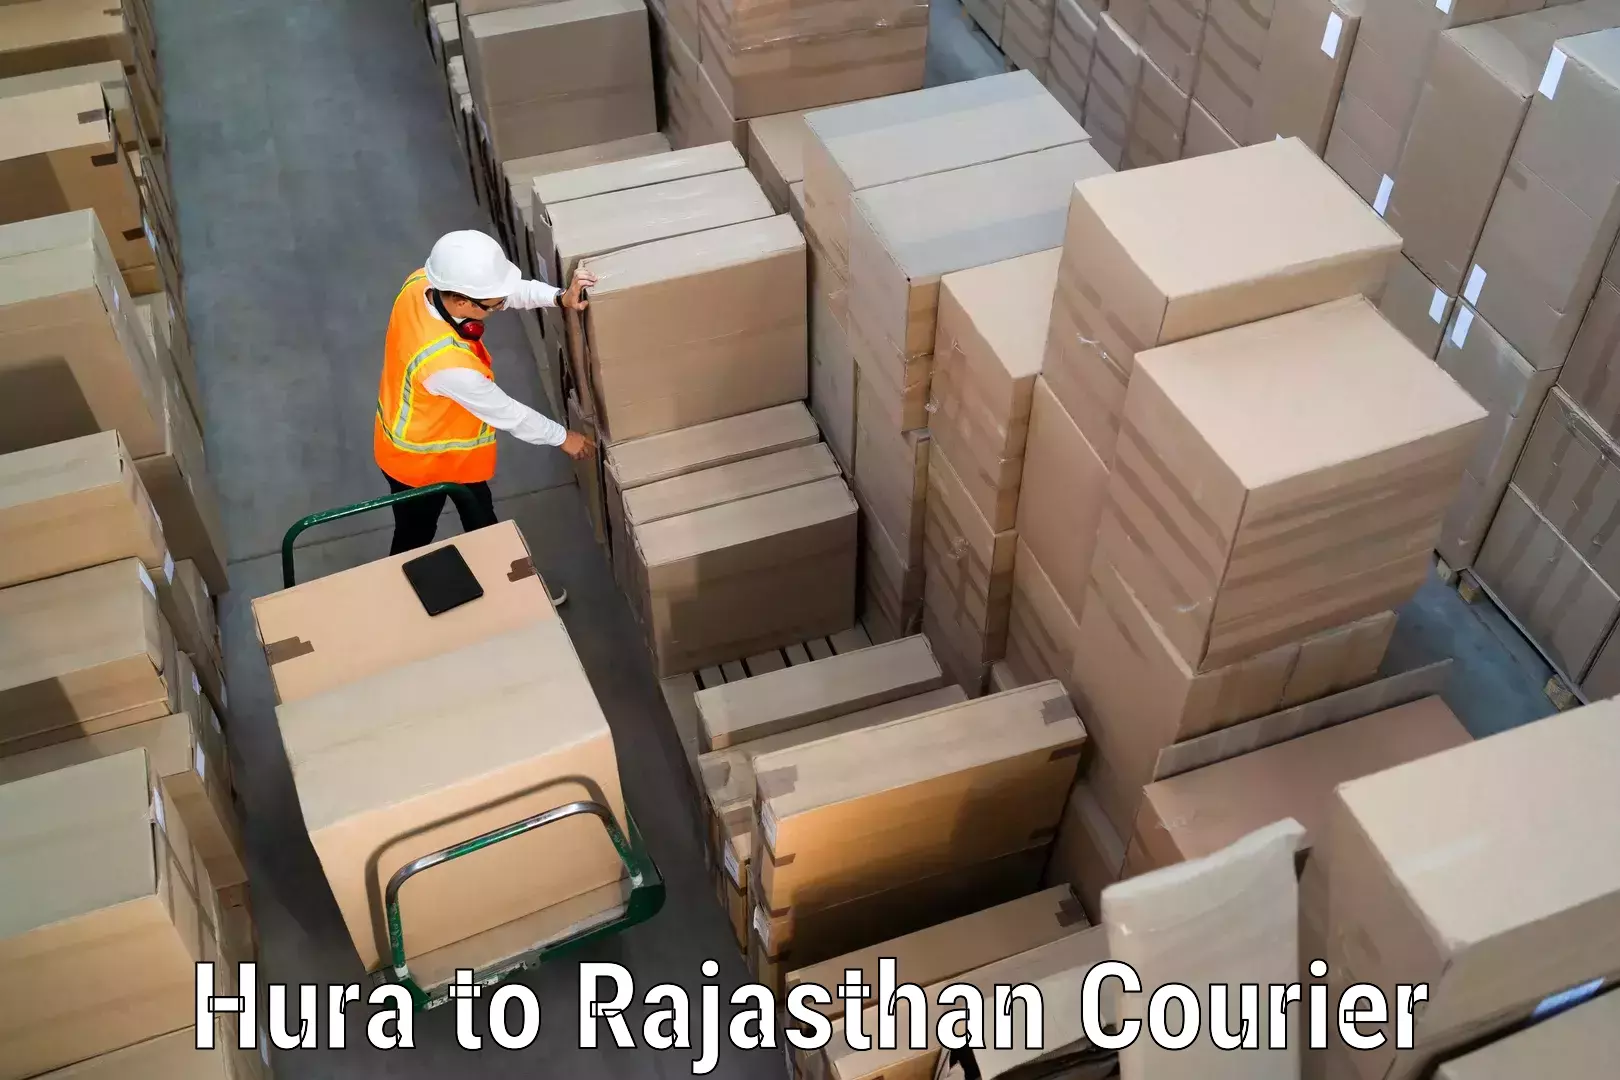 On-call courier service Hura to Rajasthan